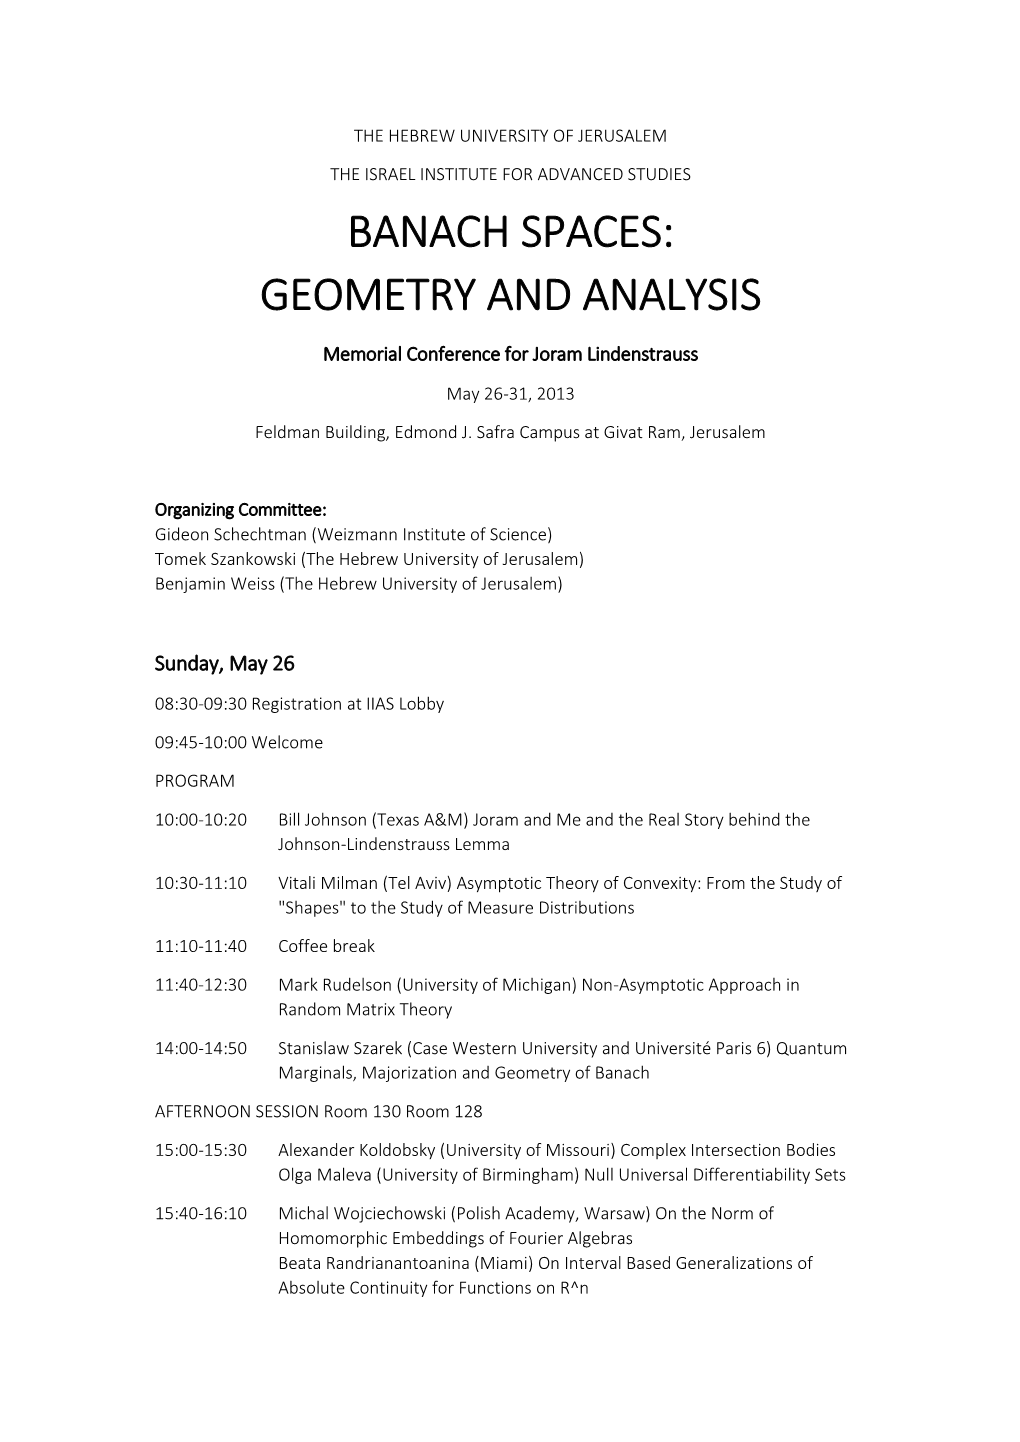 Banach Spaces: Geometry and Analysis